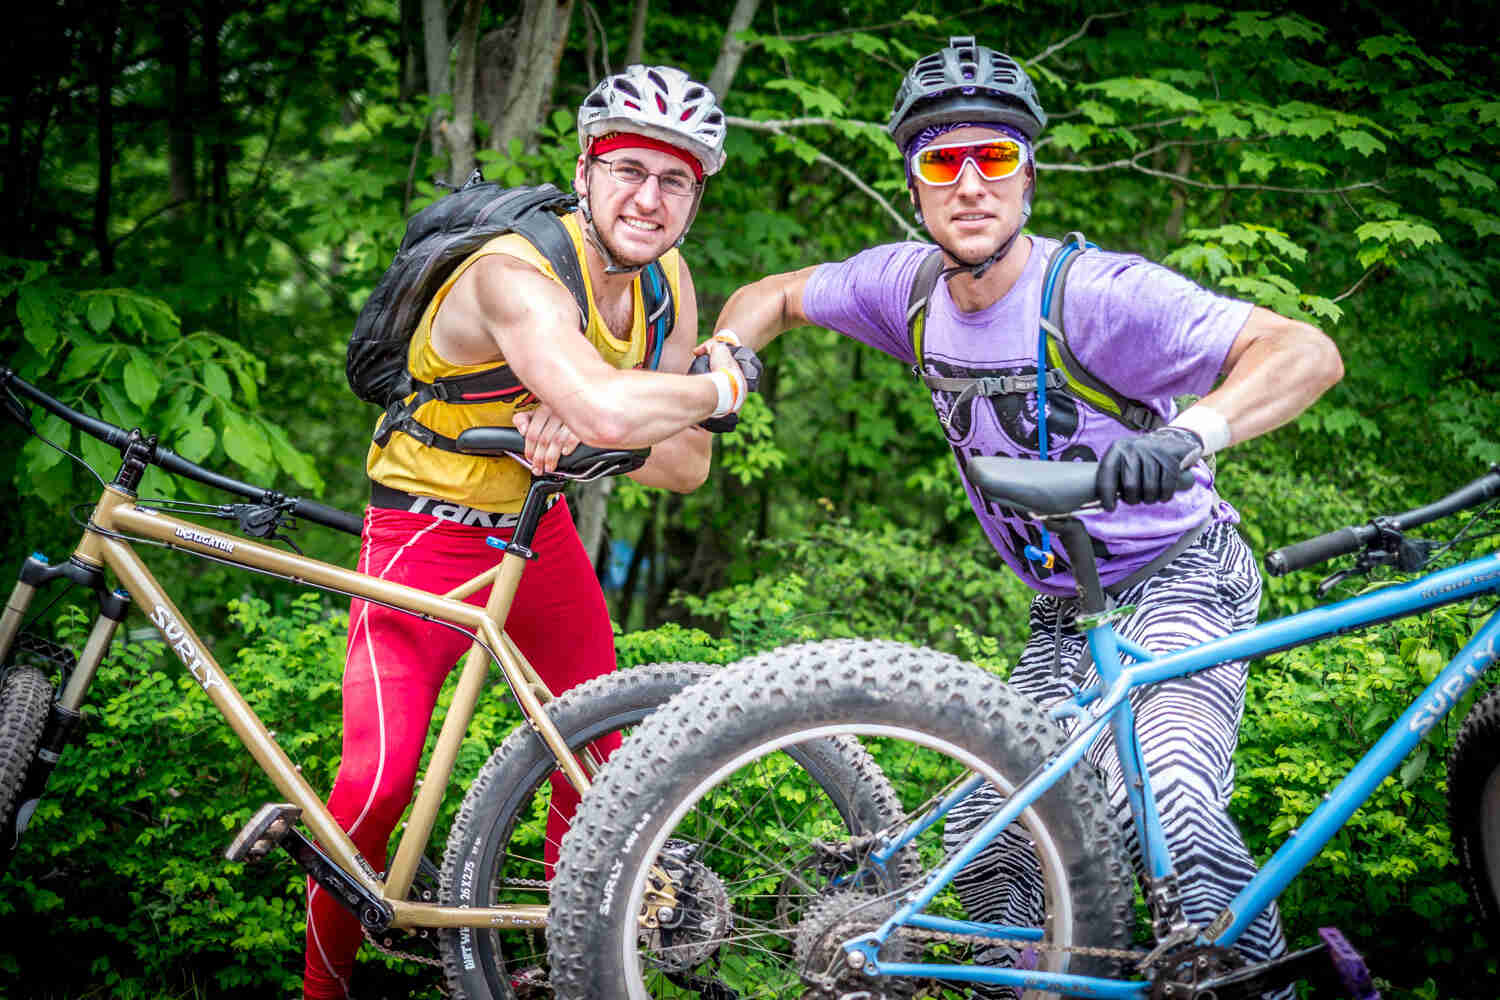 Left side view of a tan Surly Instigator bike with 2 cyclist posing behind, shaking hands, and woods in the background